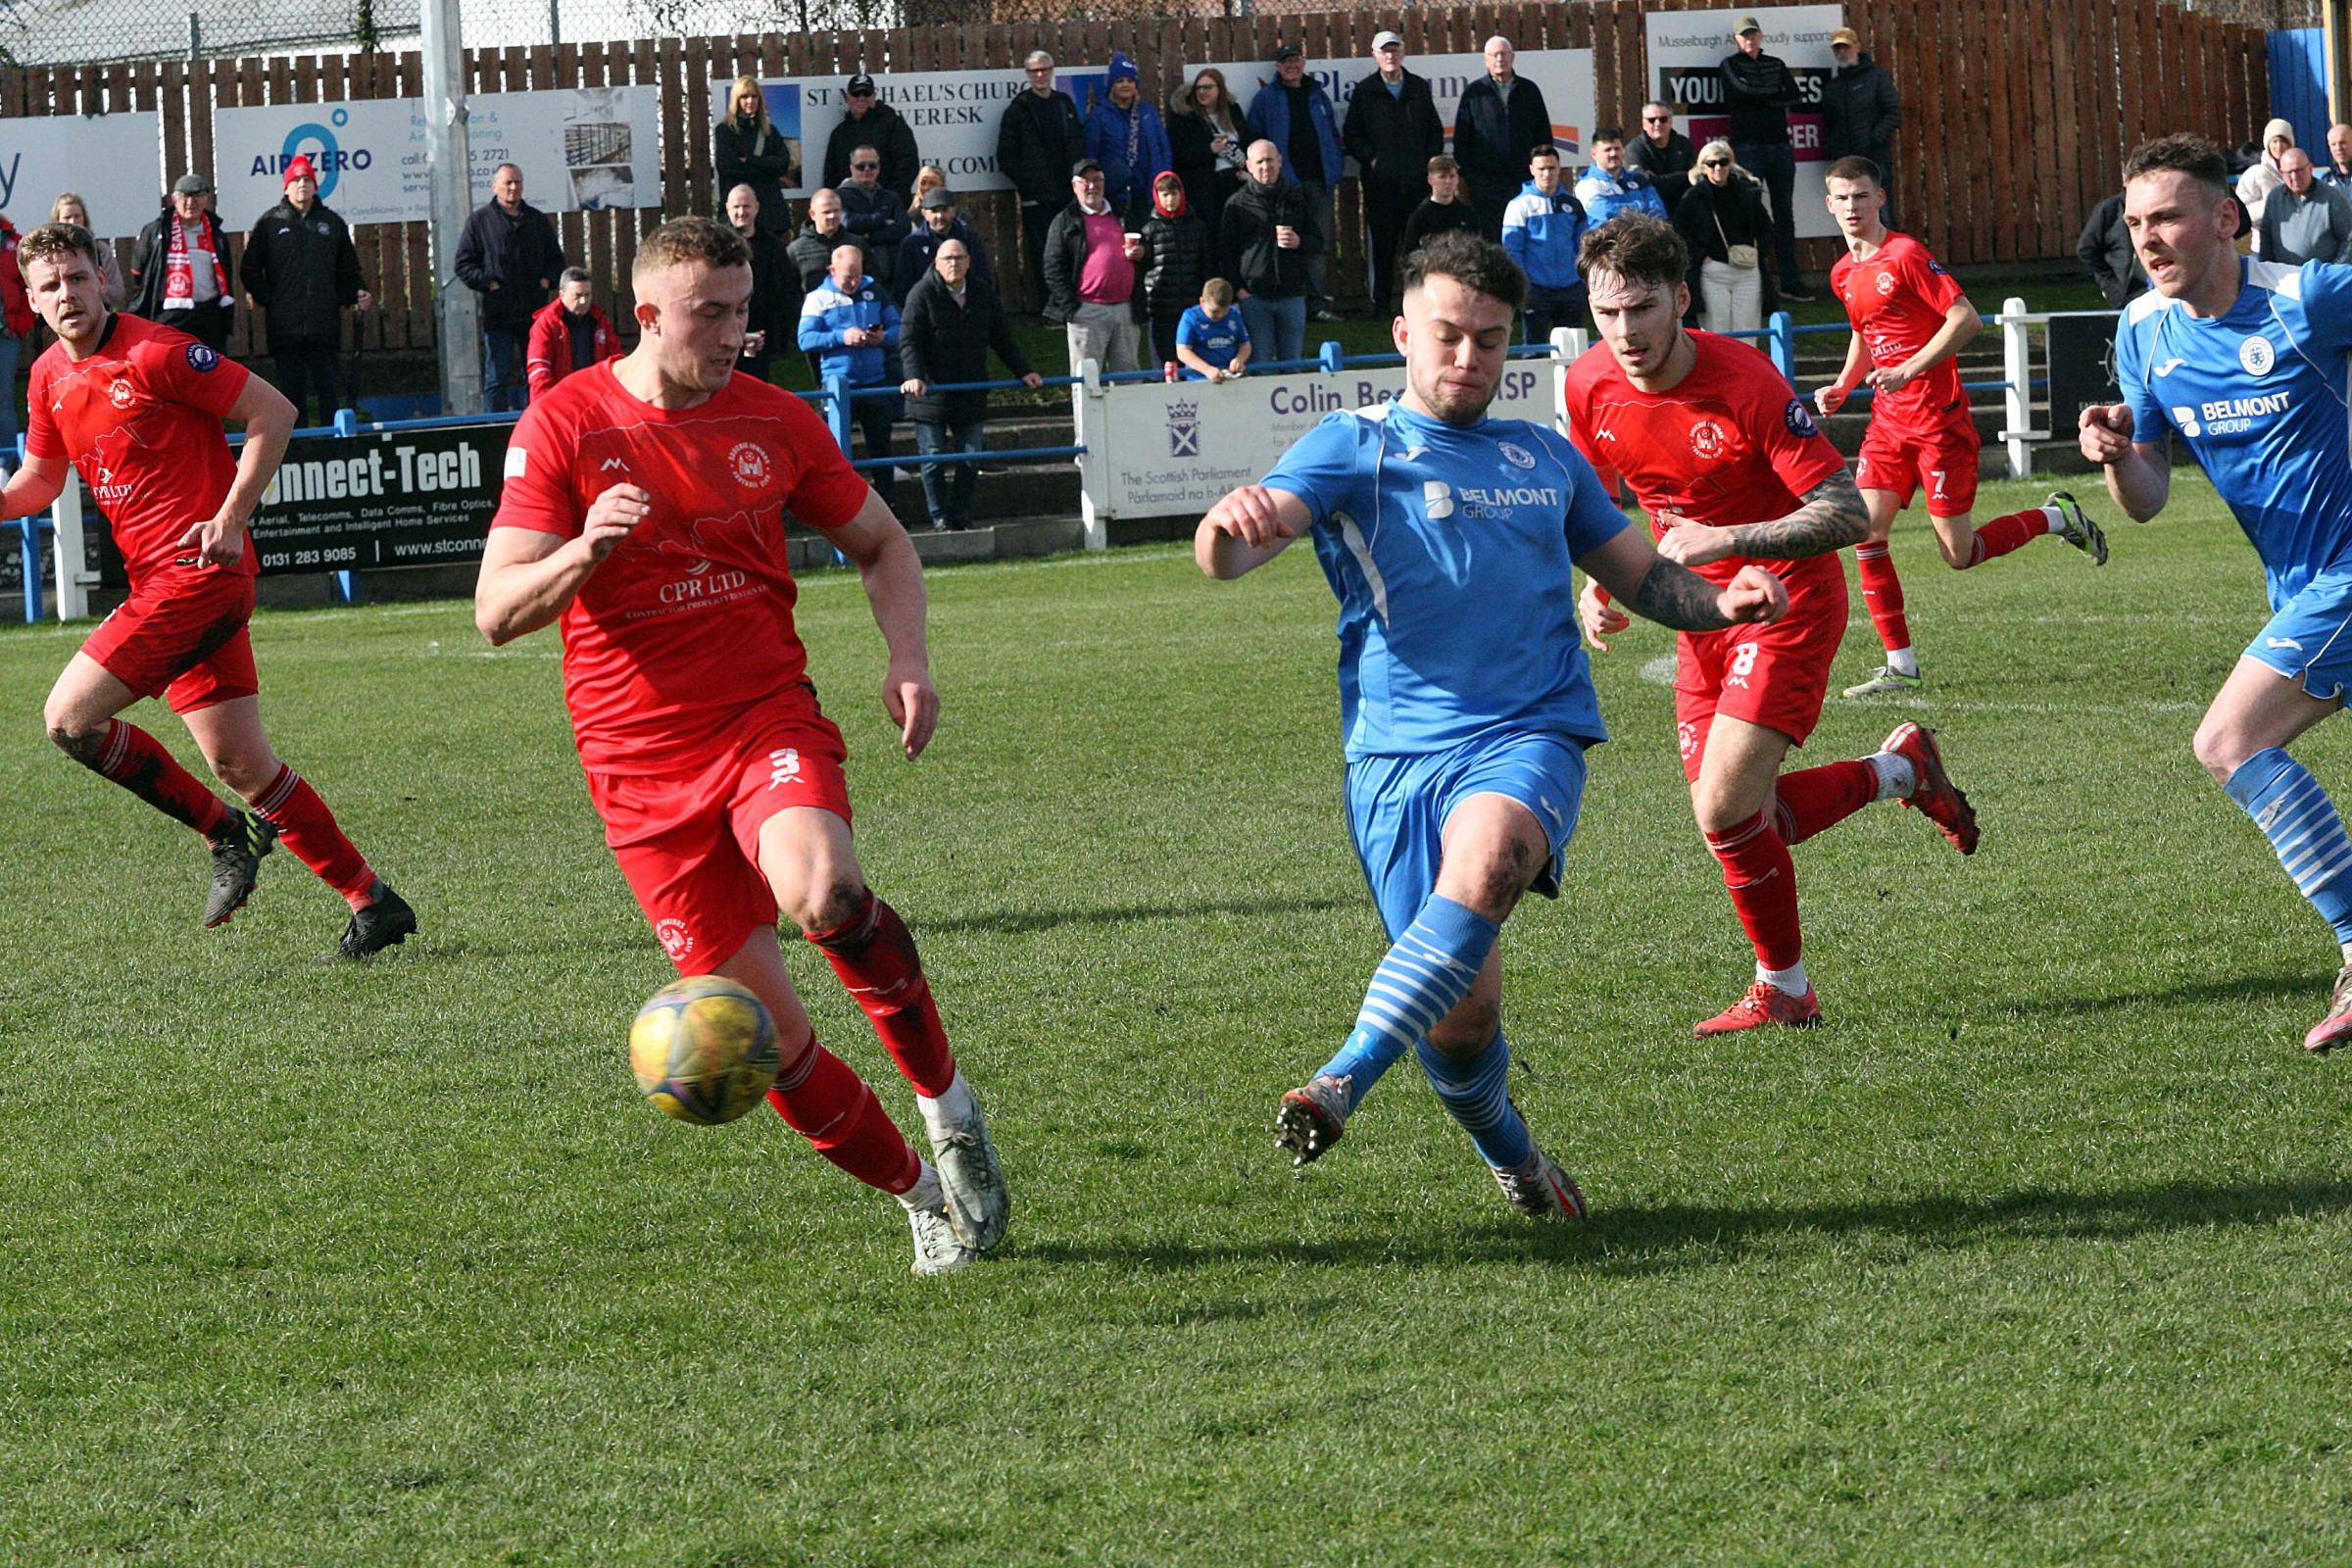 Musselburgh Athletic (blue) head to Luncarty